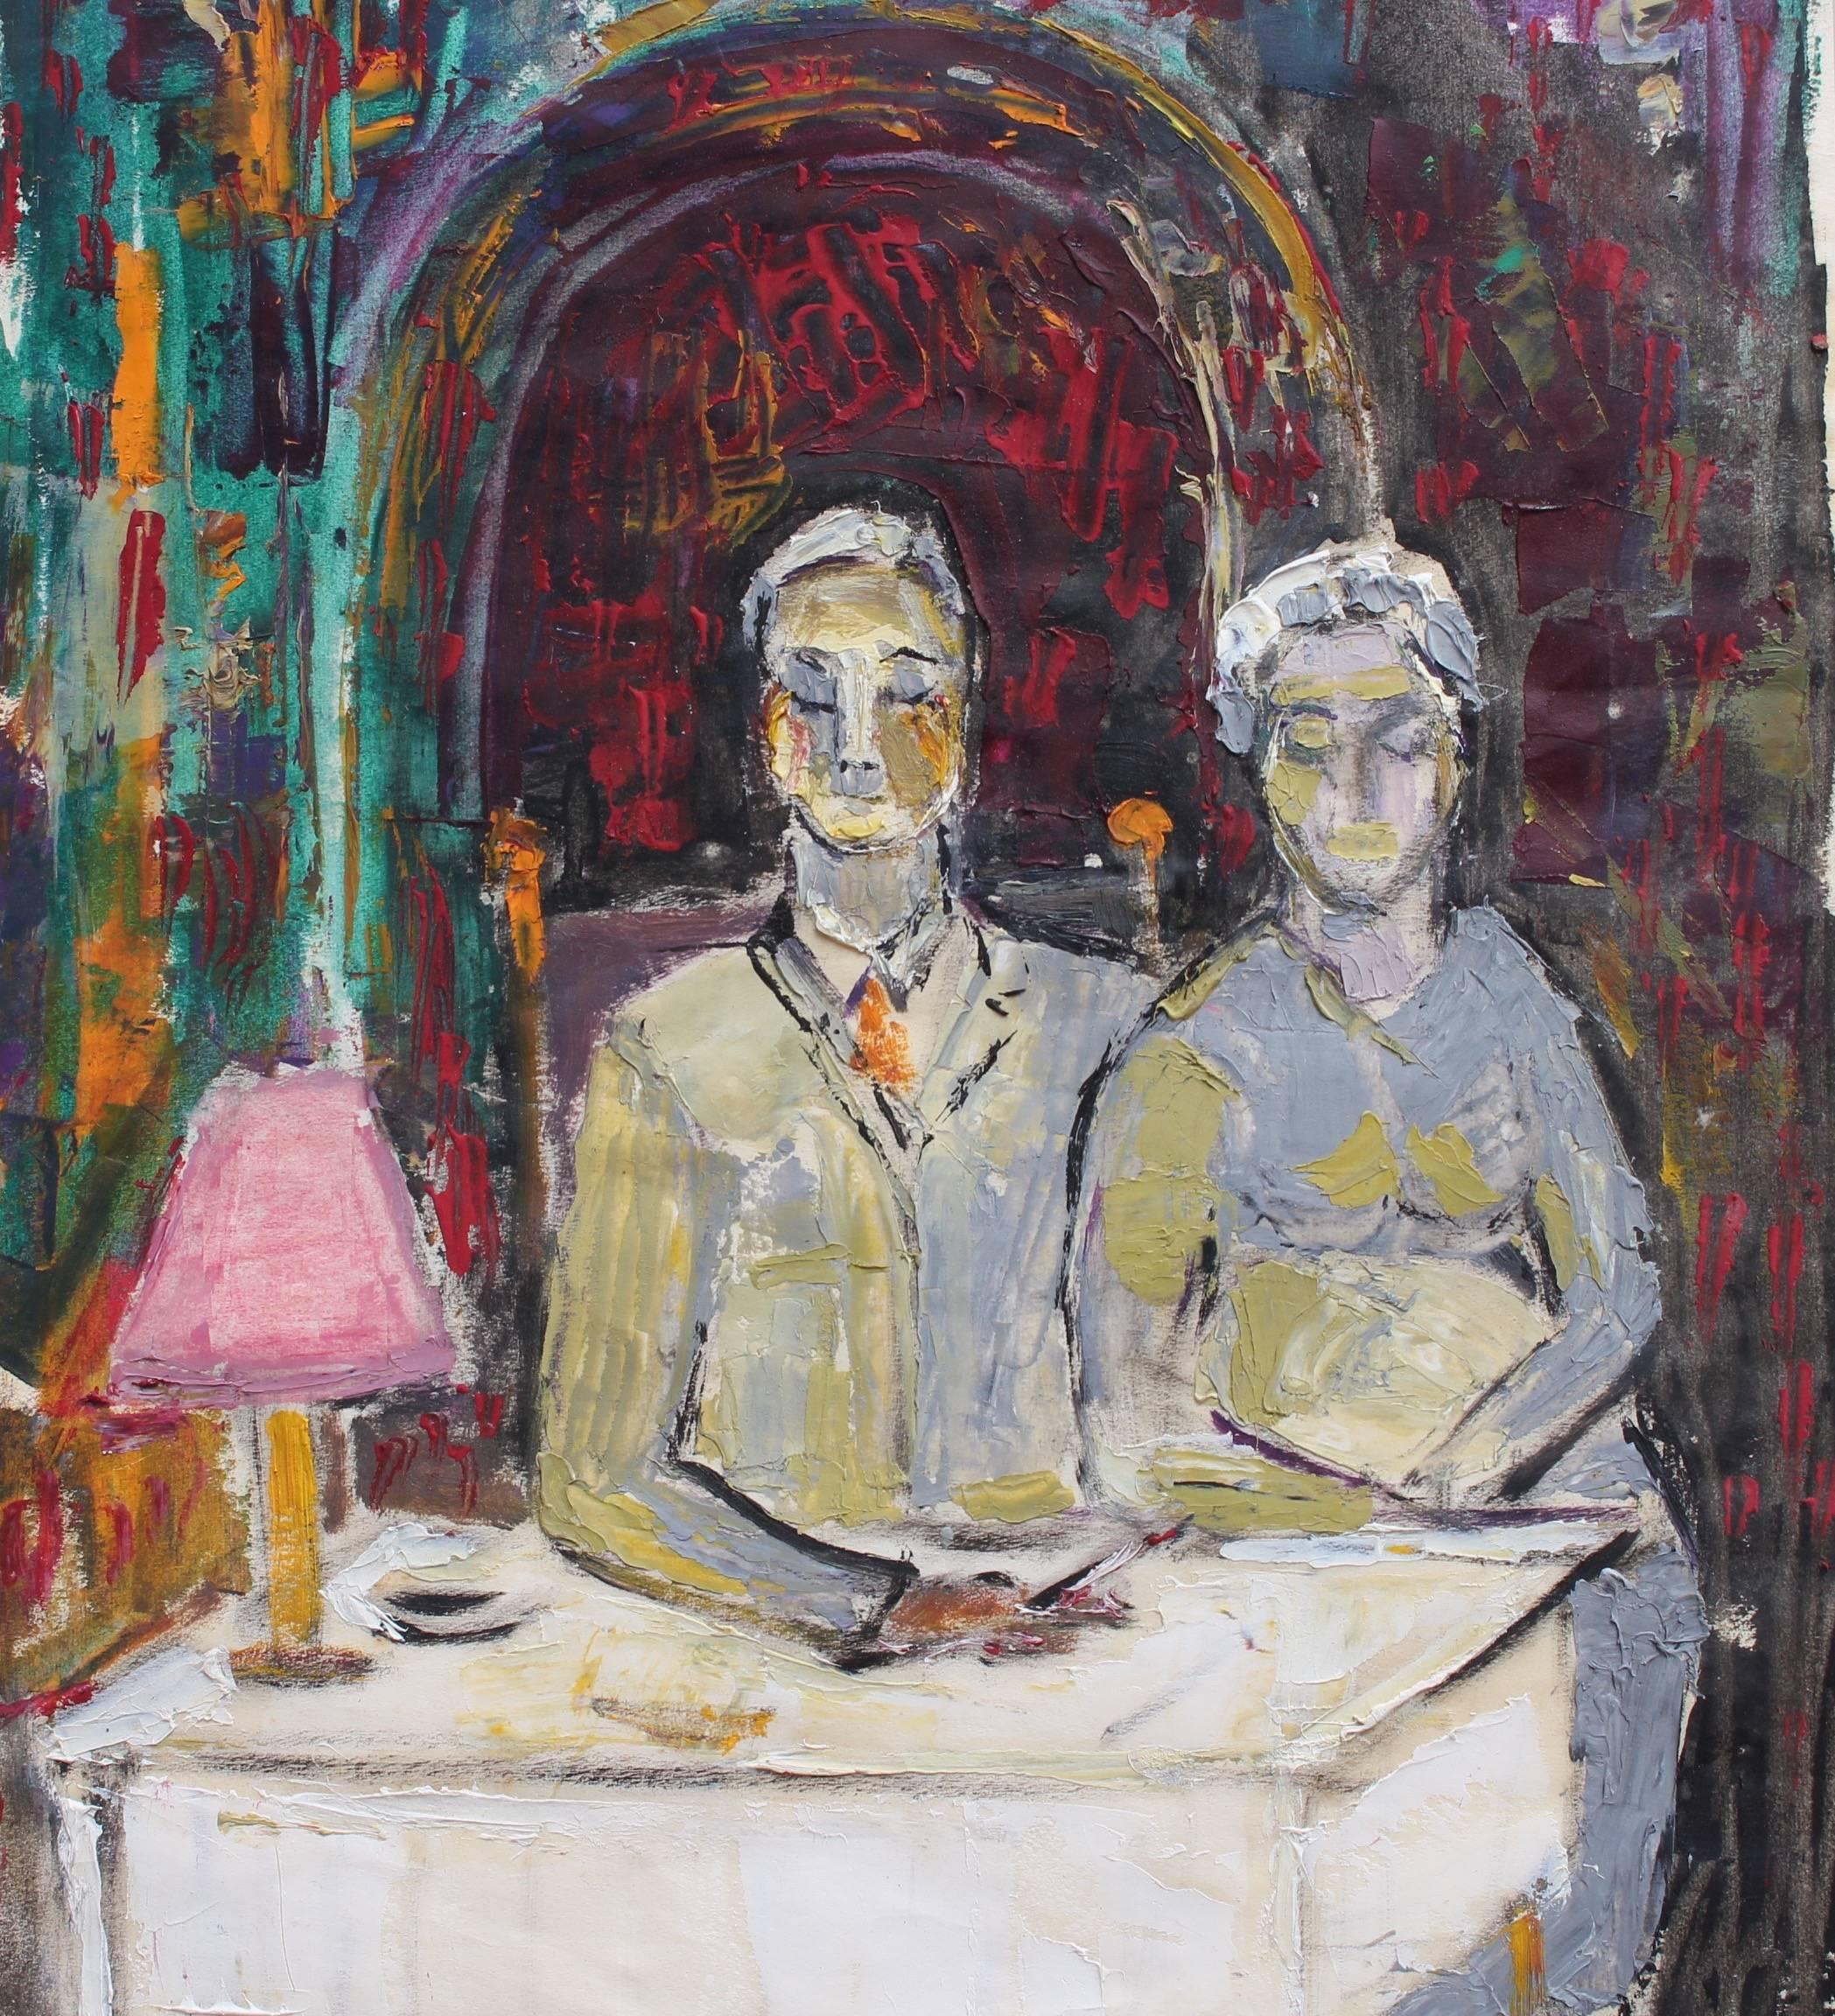 'Portrait of the Owners of the Cheval d'Or Paris', oil on paper, (1960) by René Hamiot (1912 - 1975). The Cheval d'Or was a well known restaurant and cabaret in Paris's Latin Quarter on Rue Descartes. It was open between 1955 and 1969 and was a